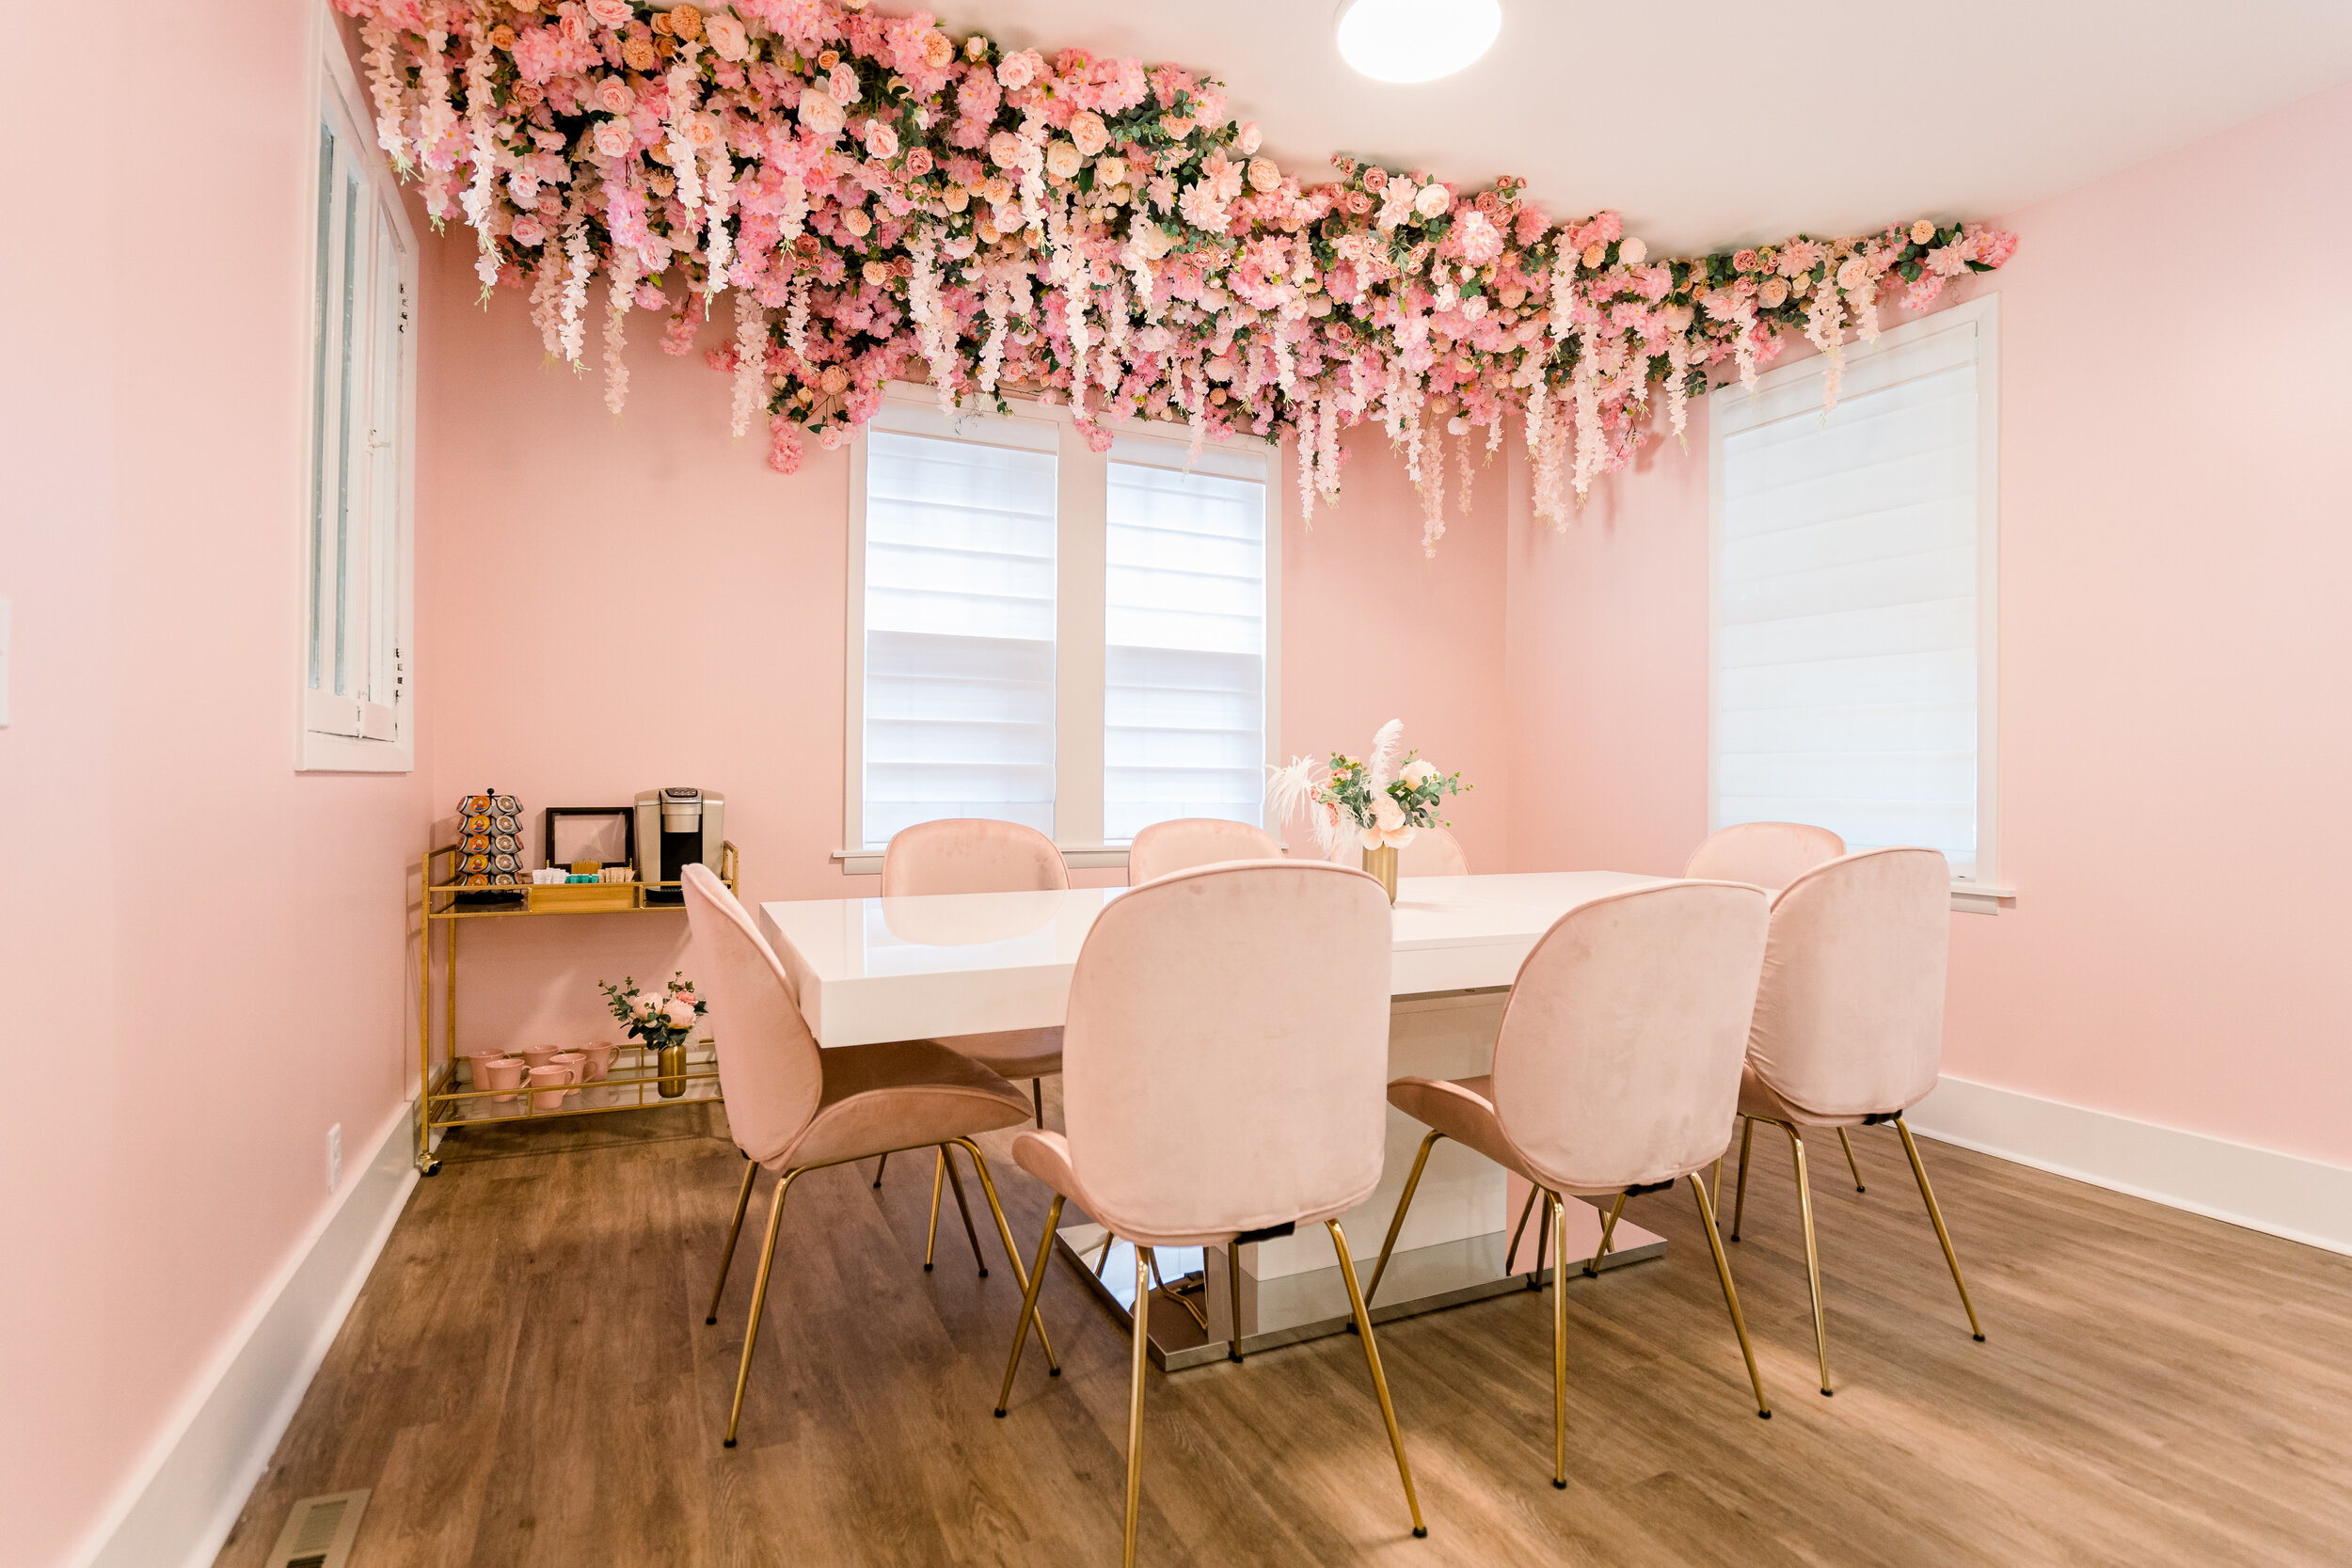 This bachelorette airbnb has a semi permanent ceiling installation full of faux cherry blossom, blush dahlias, pink roses, hanging wisteria, and spanish moss. Designed by florist Rosemary & Finch in Nashville, TN..jpg